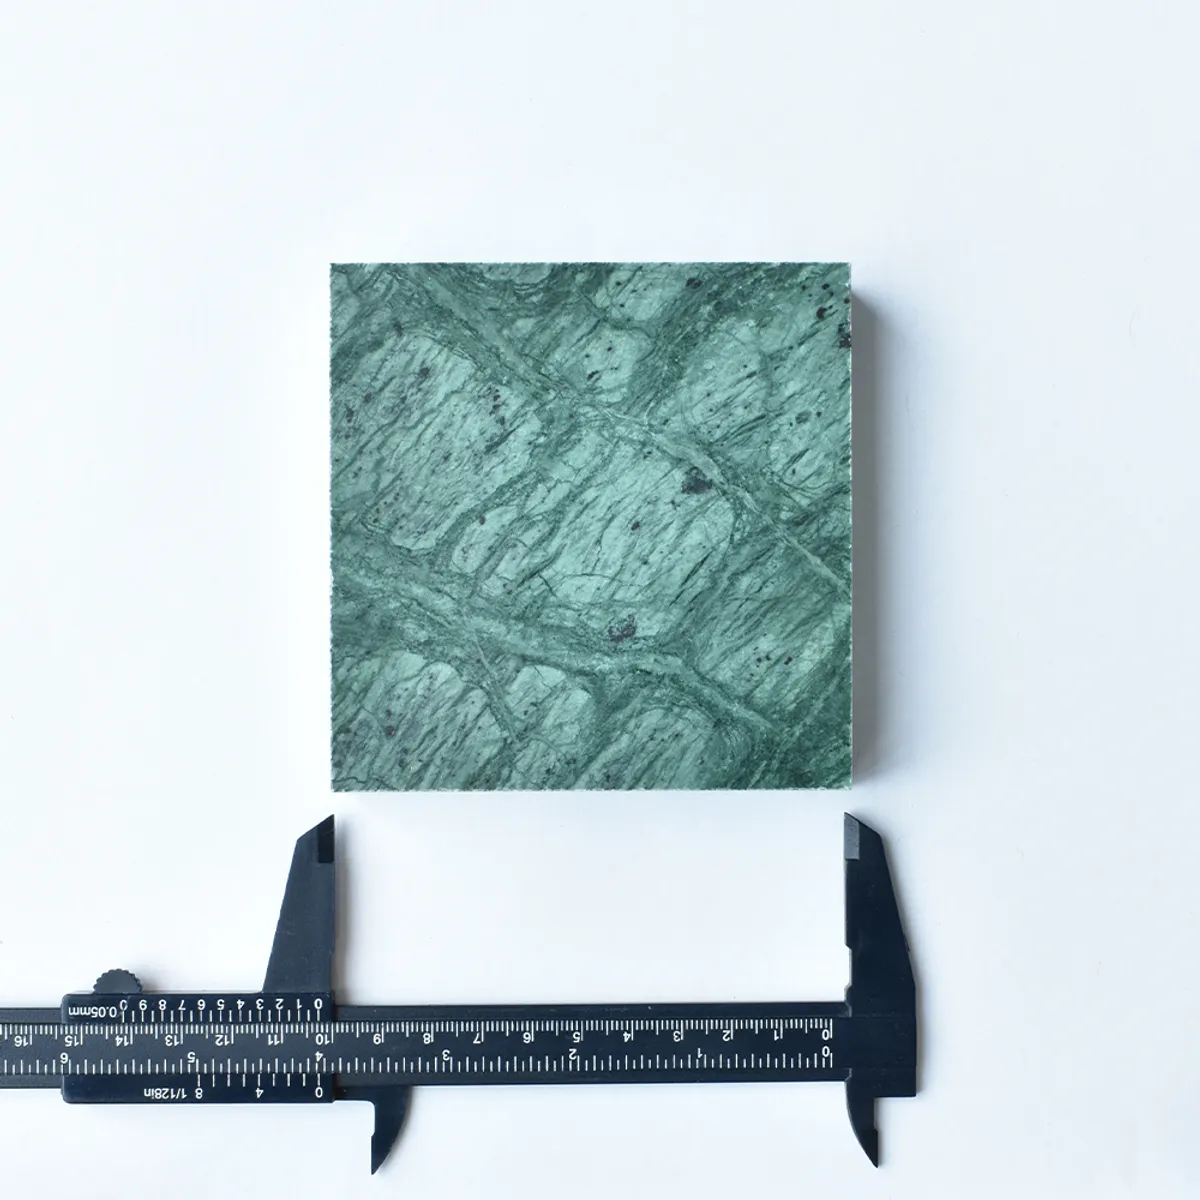 Sample 10Cm Marble Verde Rajistan Inside Out Contracts